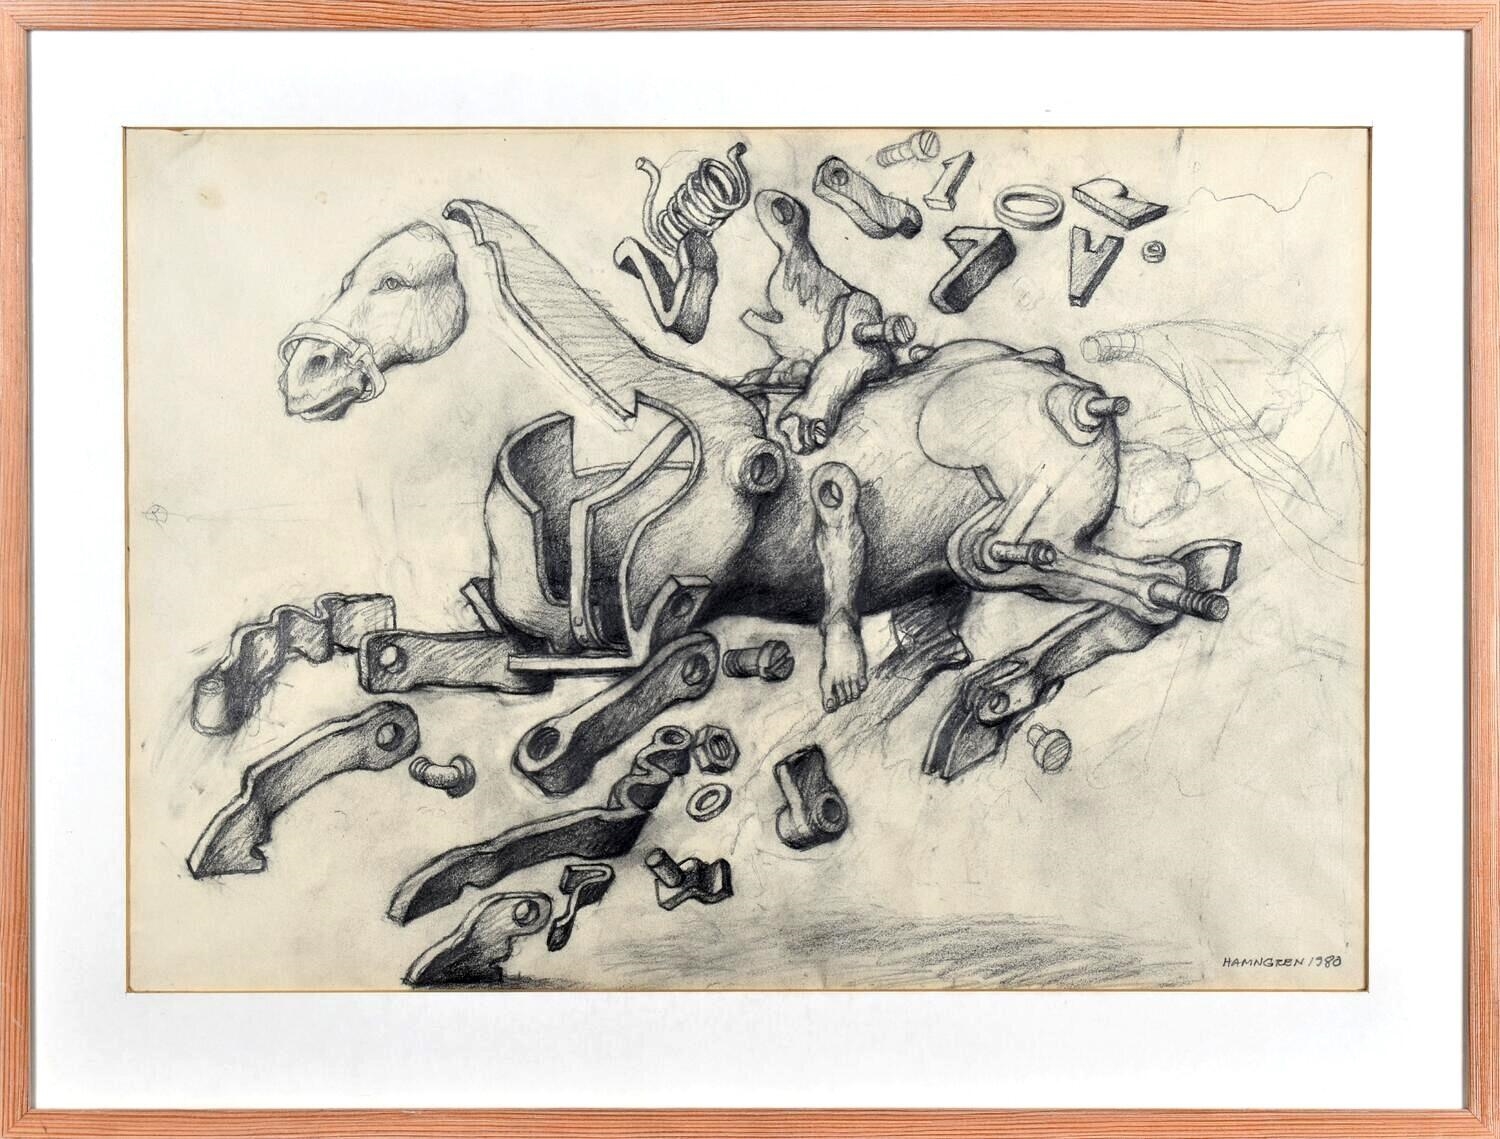 Artwork by Hans Hamngren, Sketch of mechanical horse, Made of drawing on paper